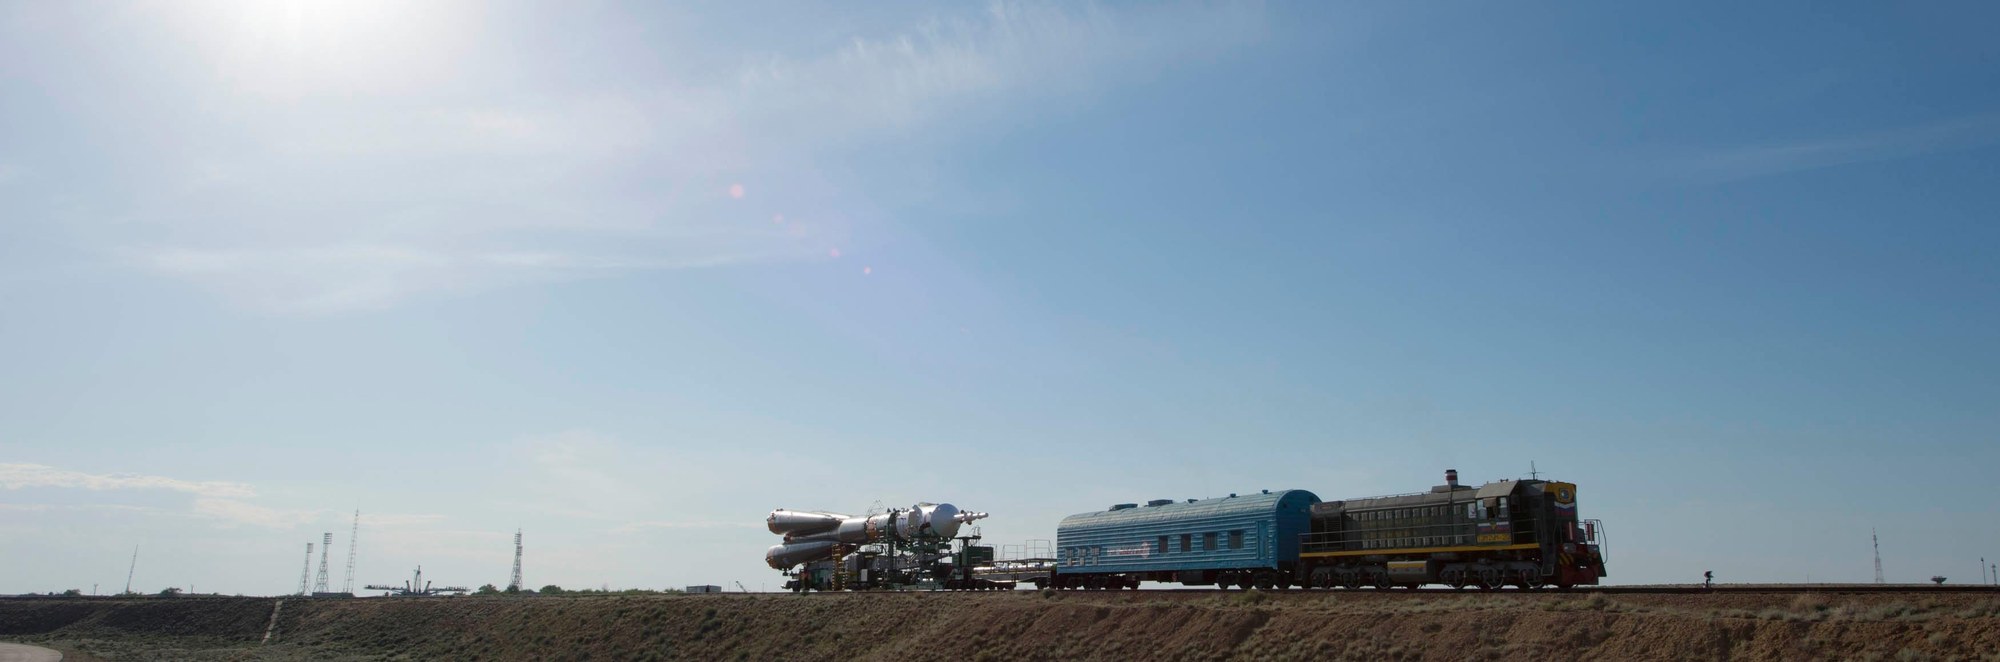 The Soyuz launcher on its way to the launch pad